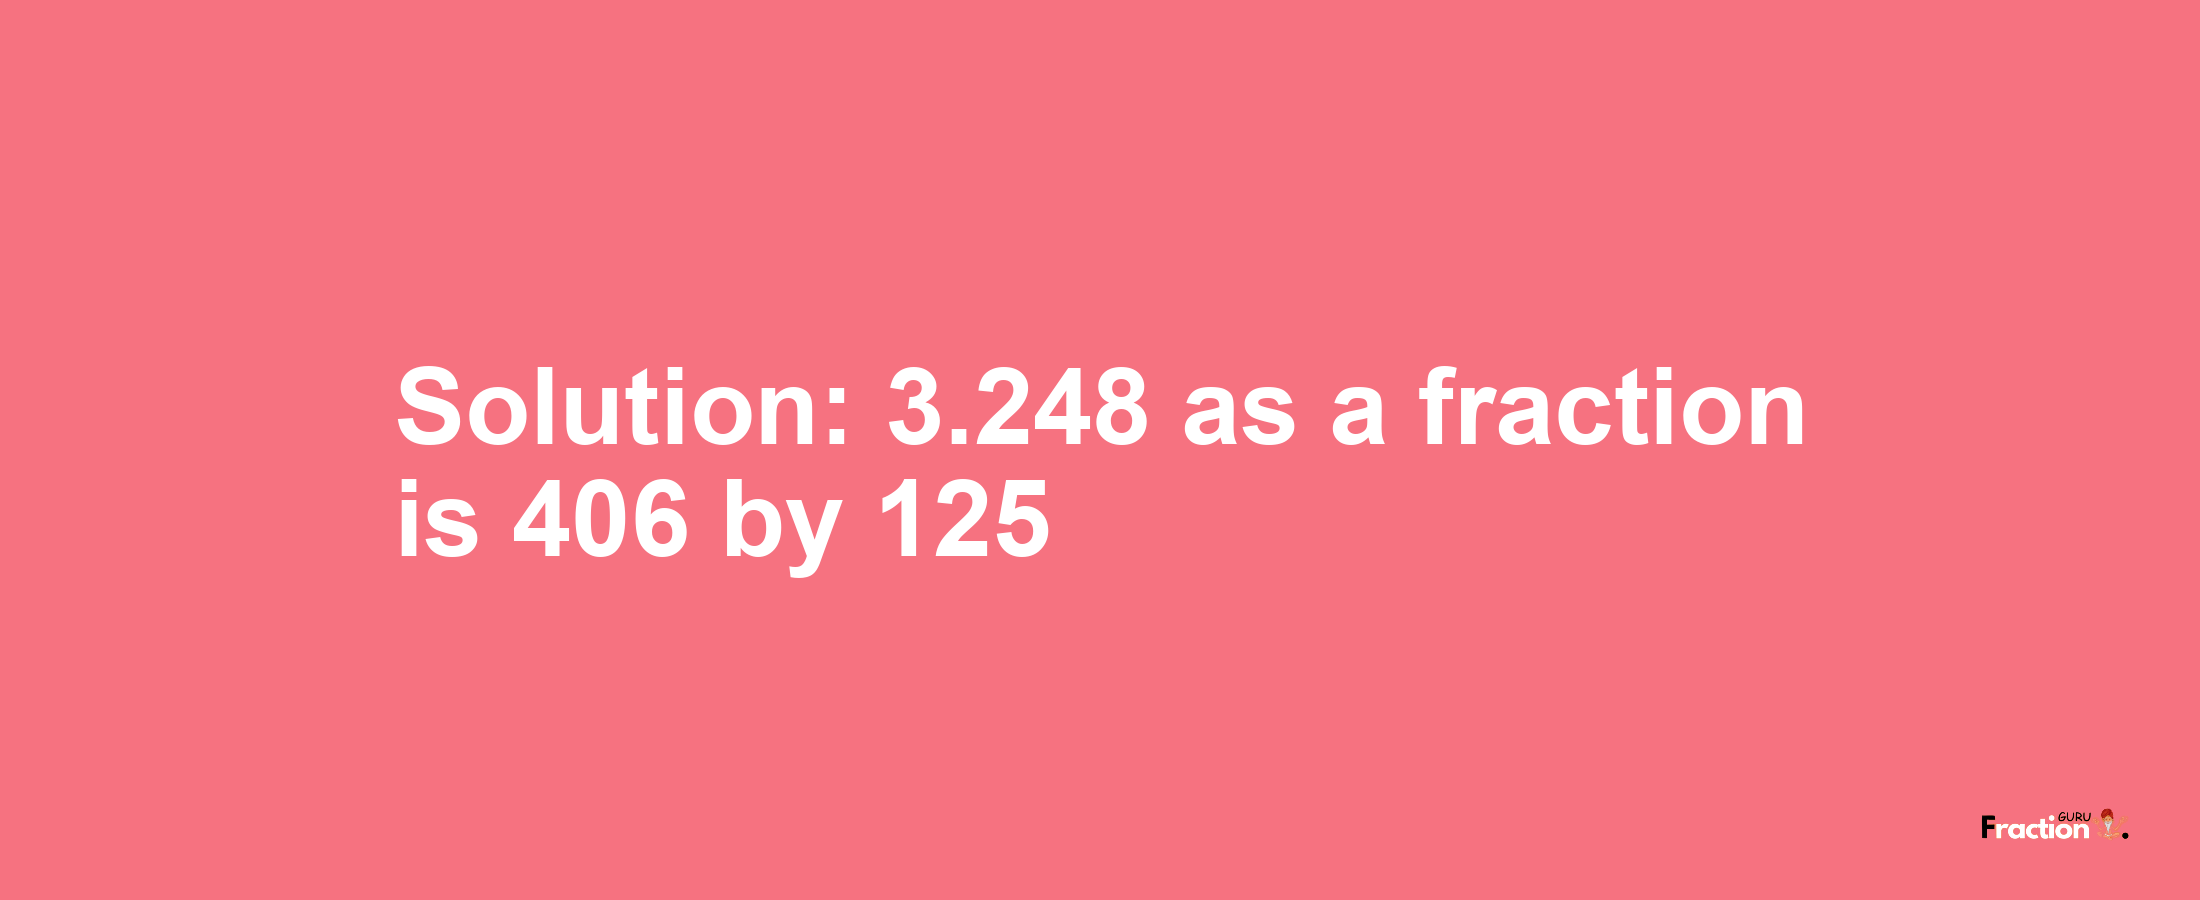 Solution:3.248 as a fraction is 406/125